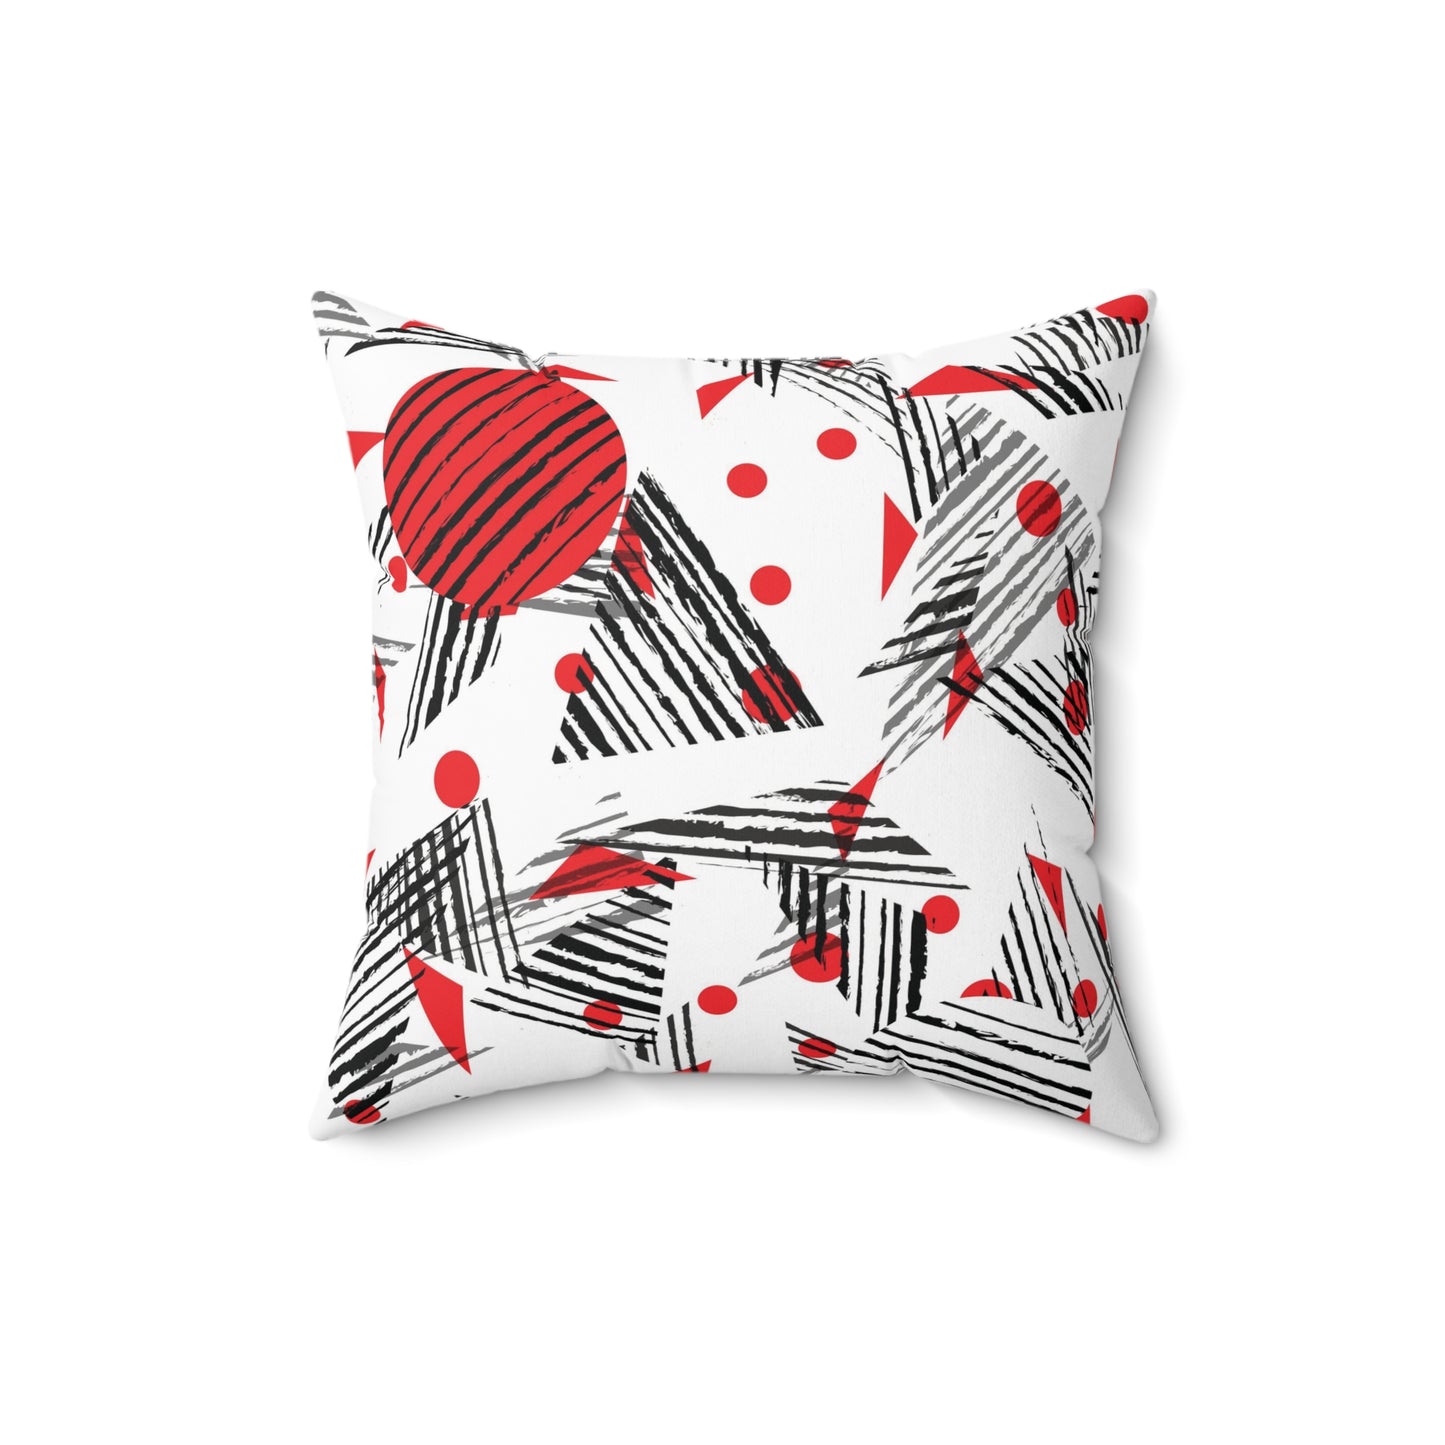 Abstract Japanese Pattern Design Square Pillow